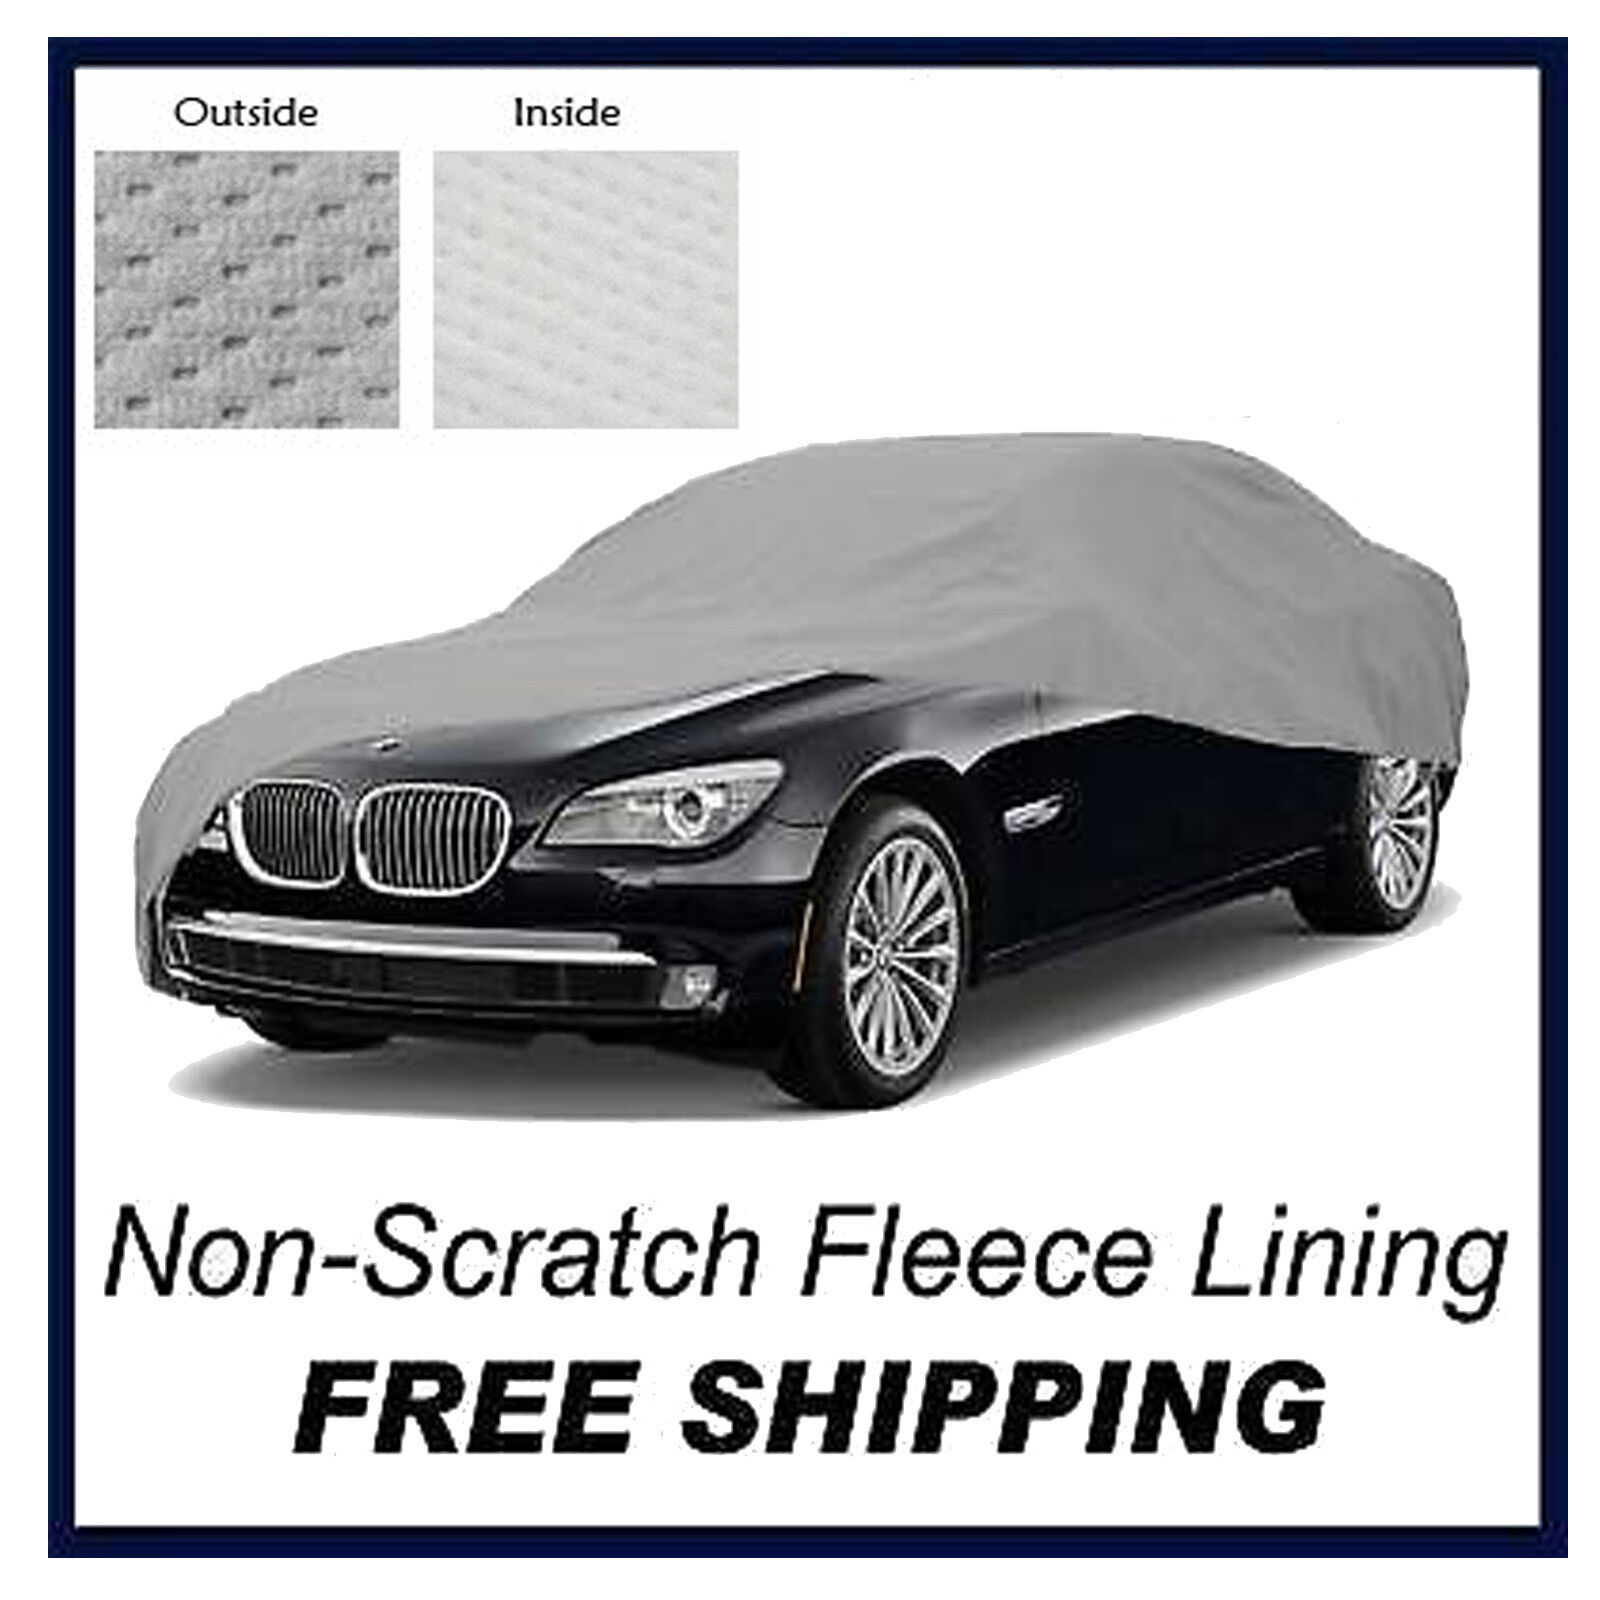 BMW 530iT 1988-1991 1992 1993 1994 1995 1996 5 LAYER CAR COVER